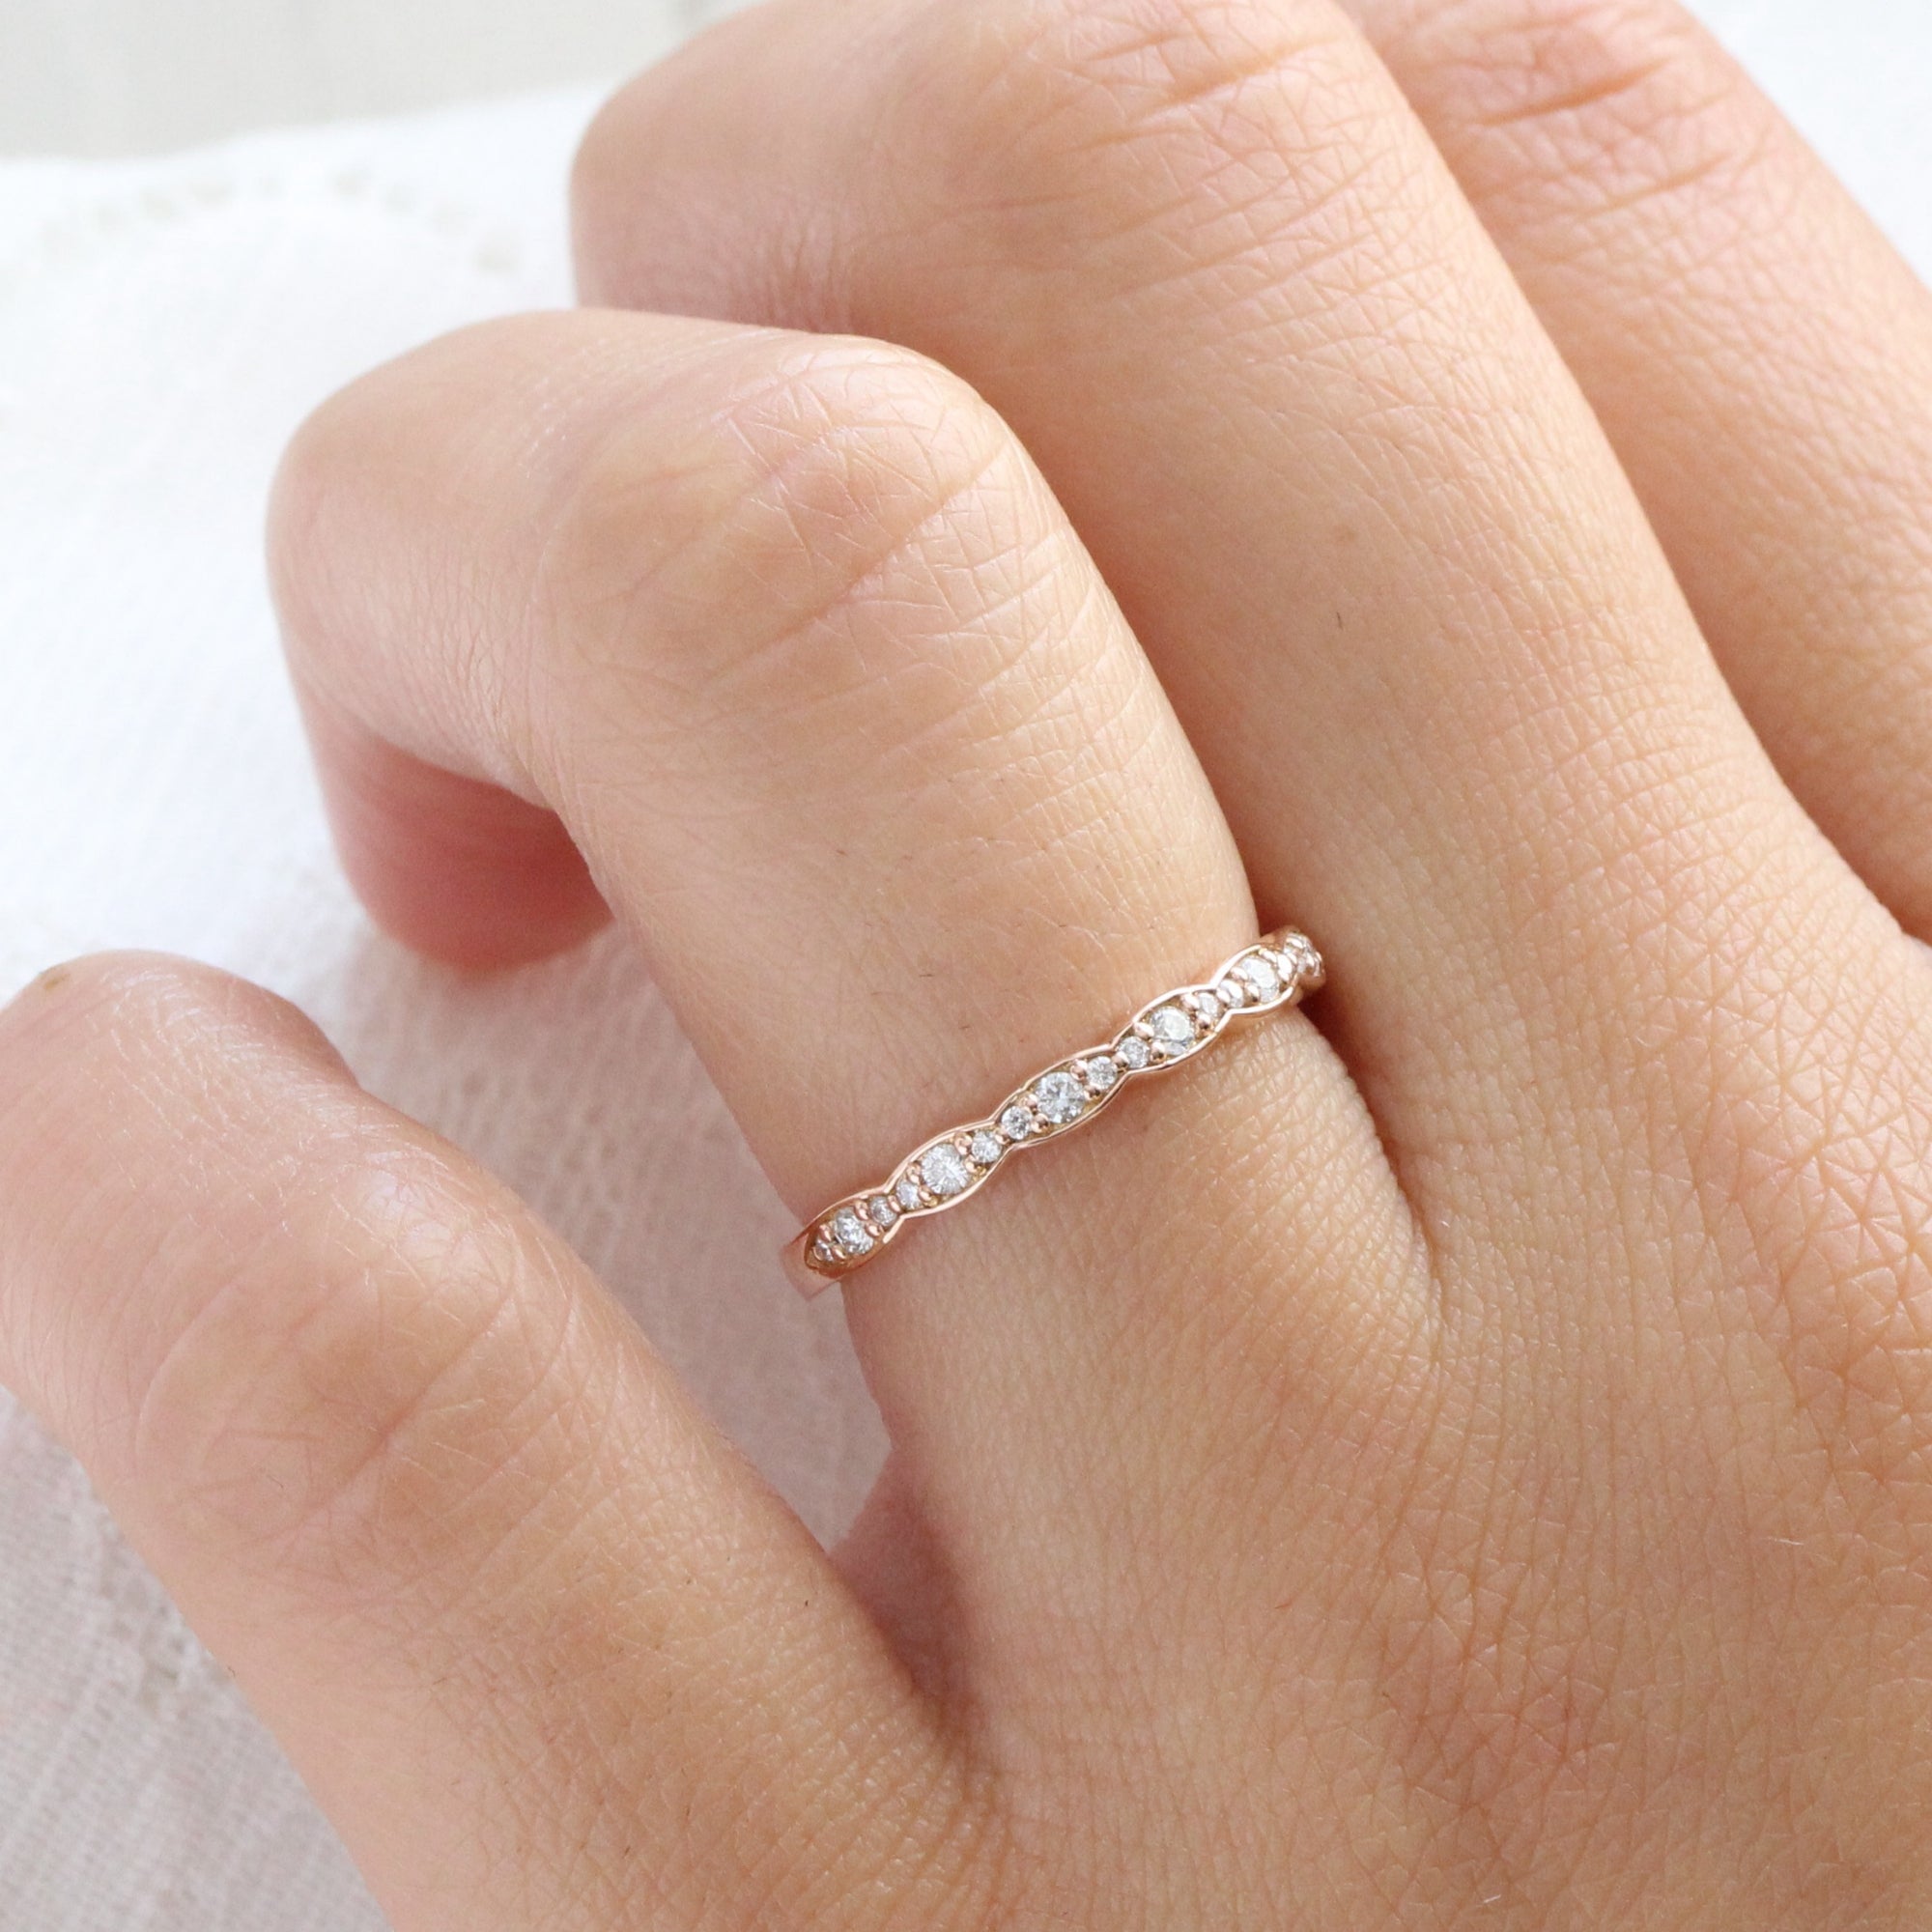 Unique Wedding Rings: 30 Wedding Rings For The Modern Bride